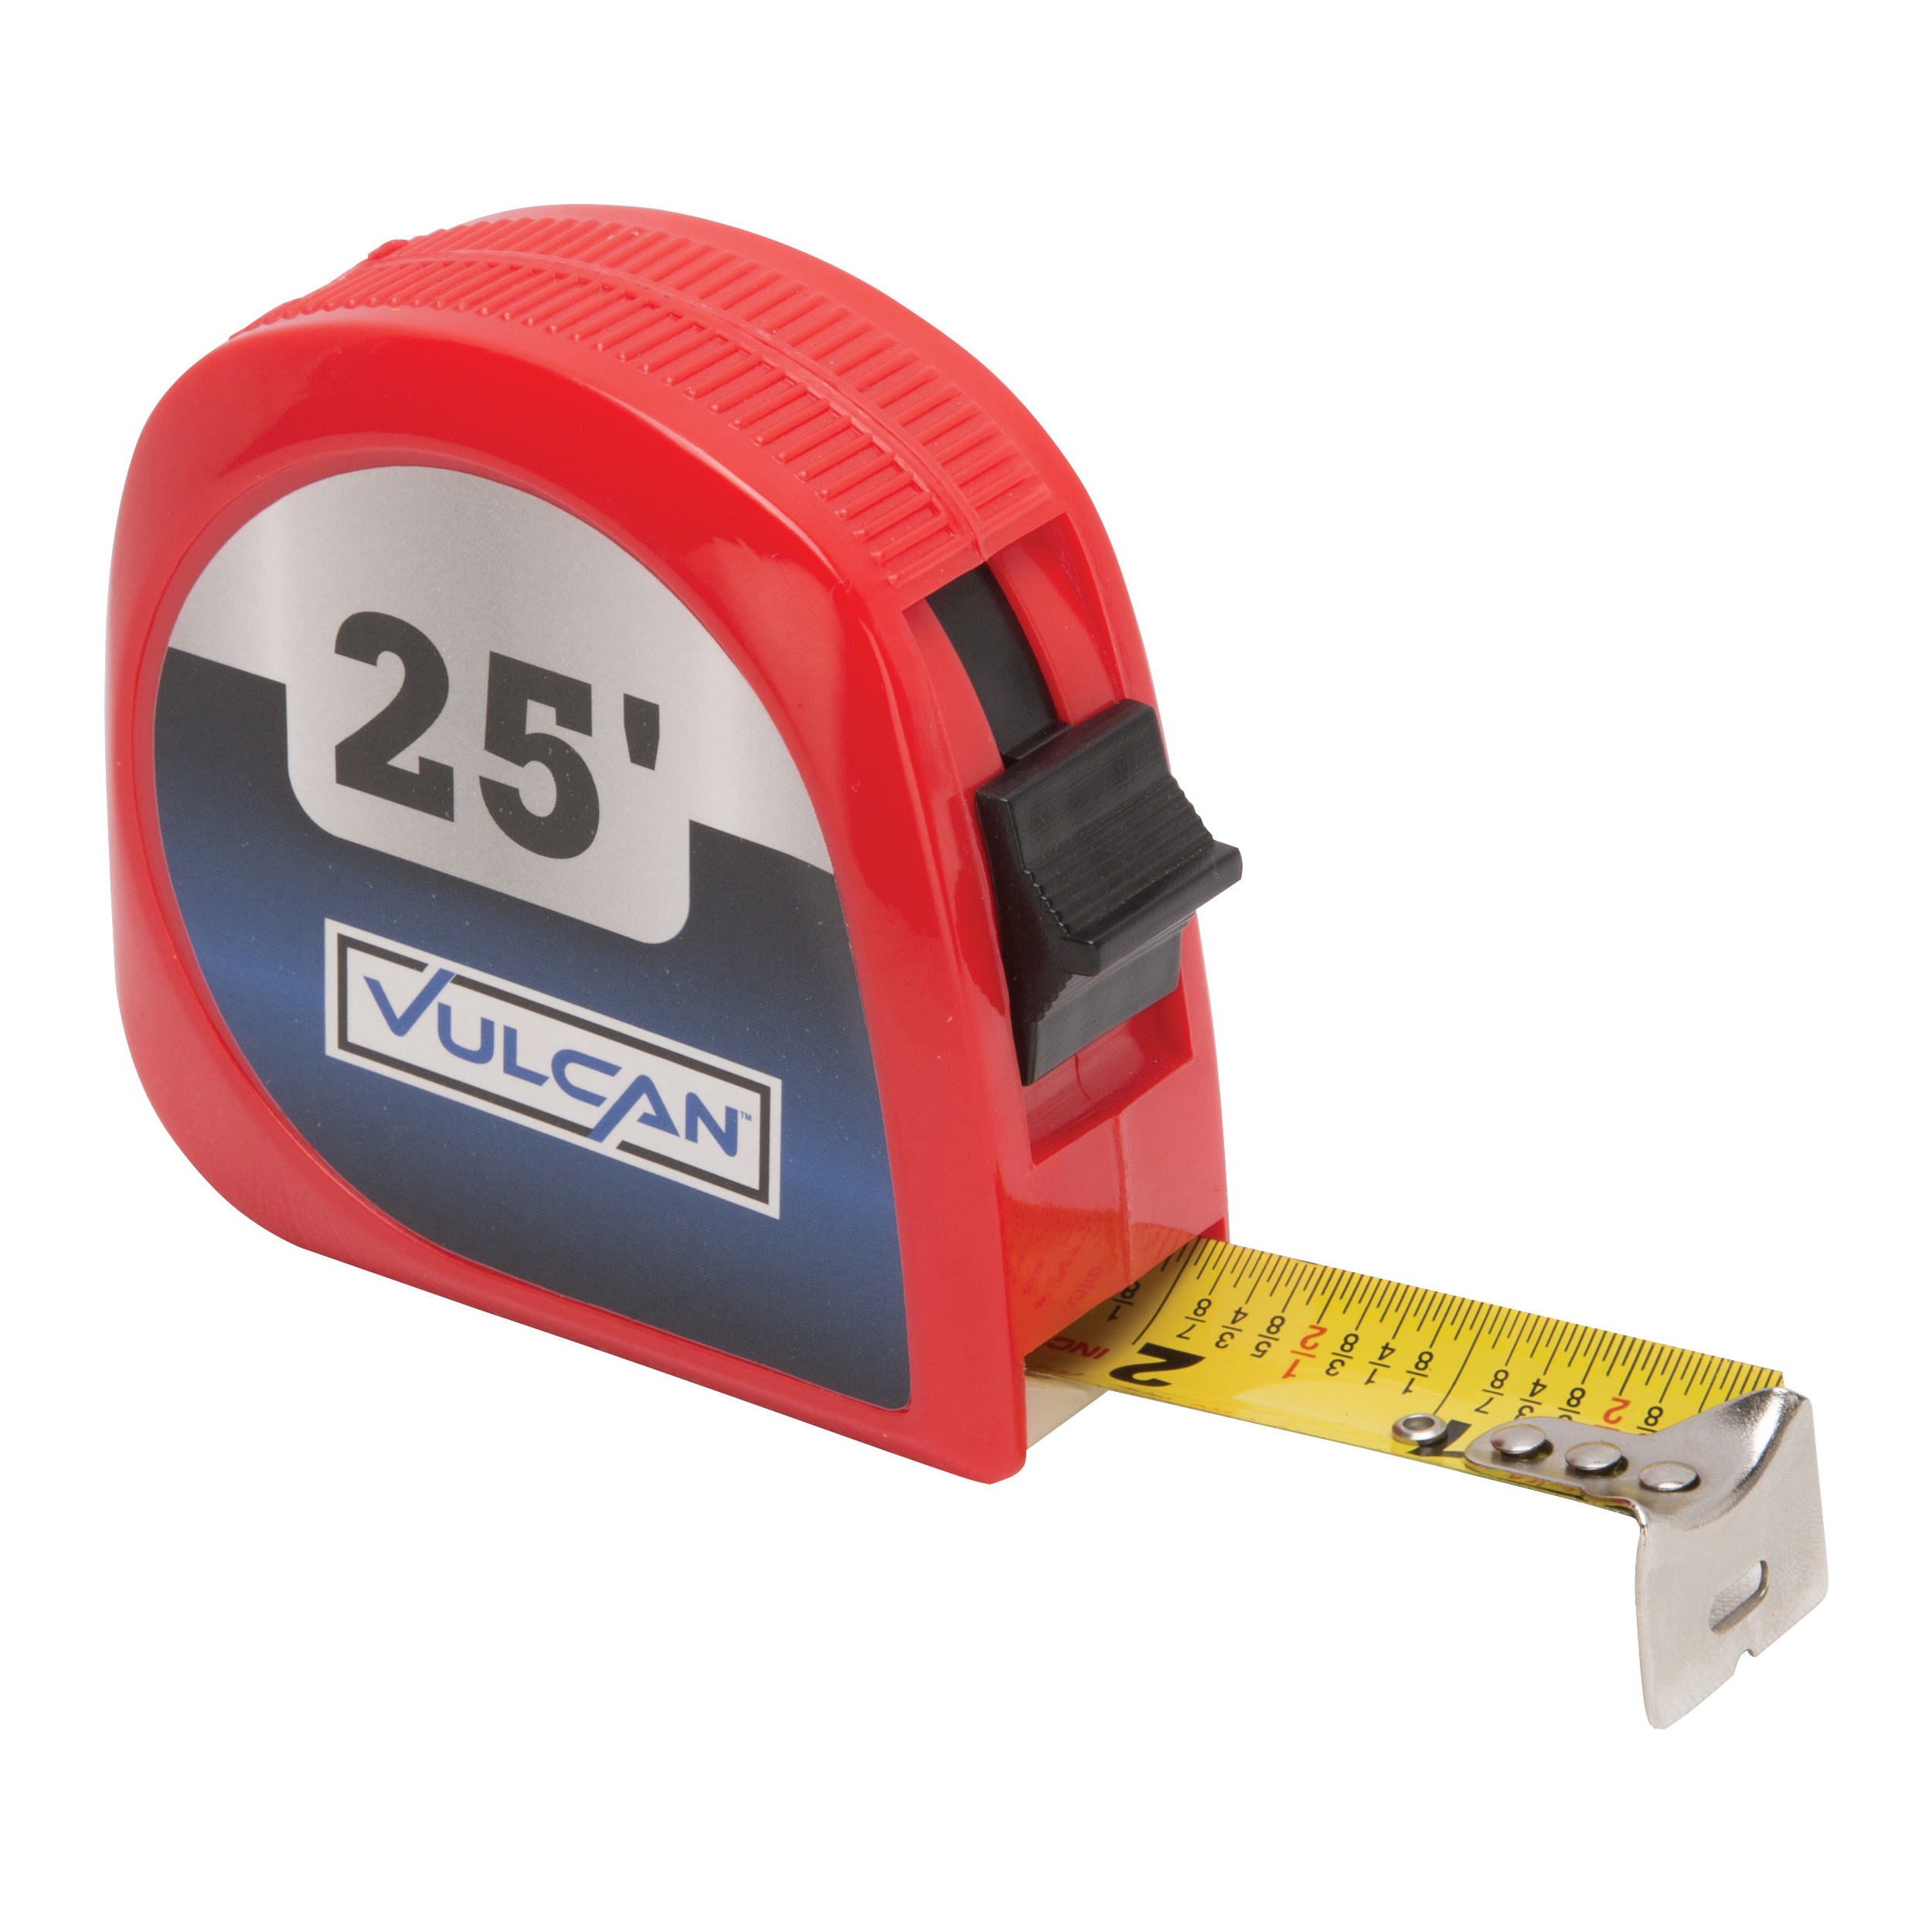 62-7.5X25-R Rule Tape, 25 ft L Blade, 1 in W Blade, Steel Blade, ABS Plastic Case, Red Case